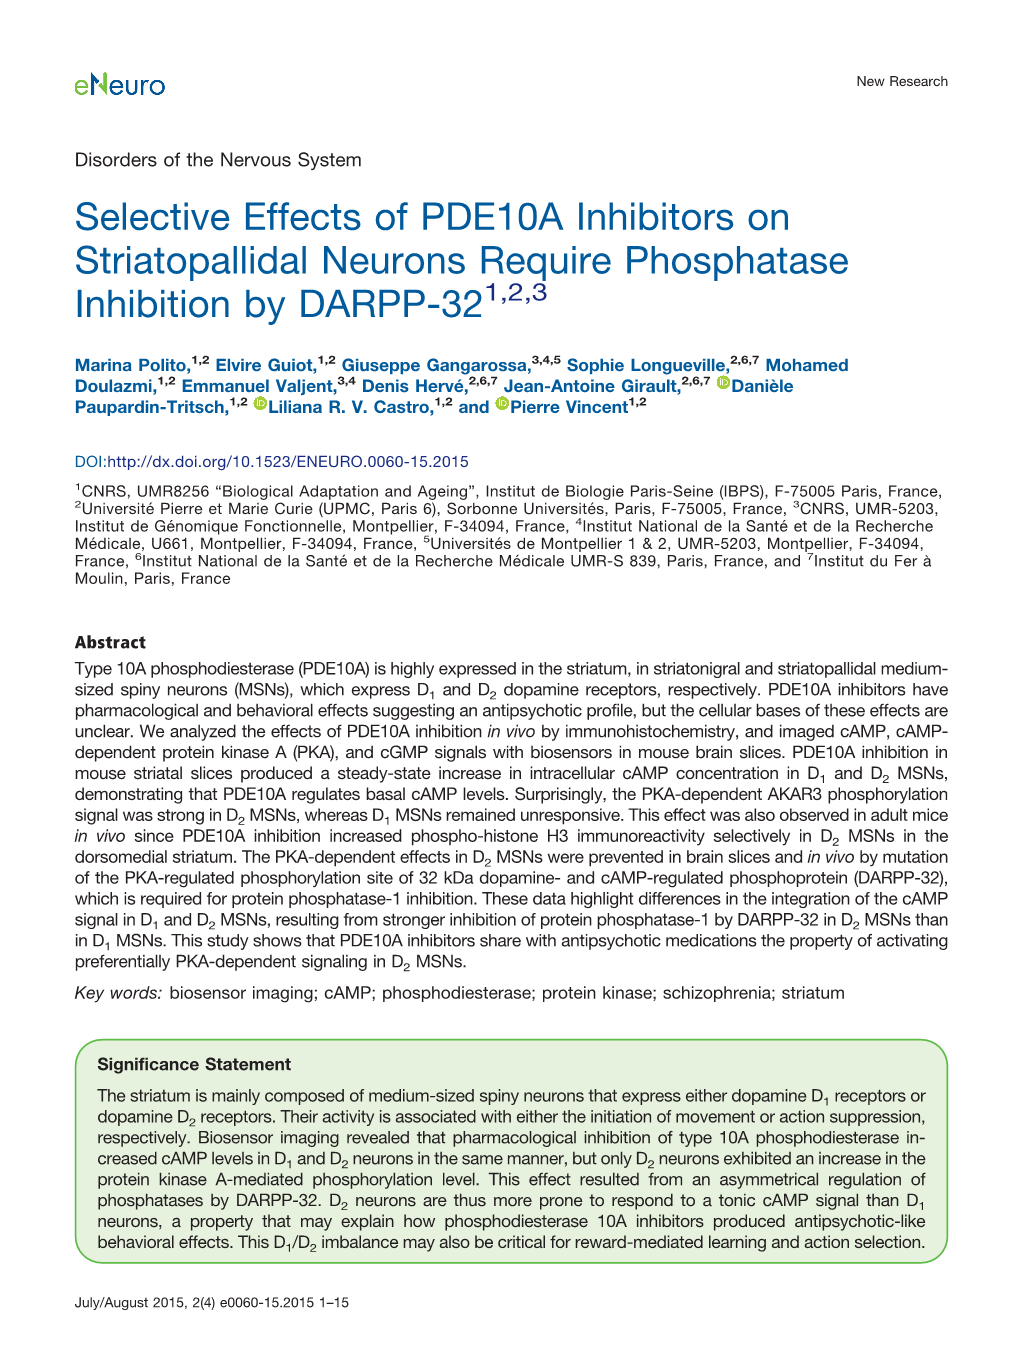 Selective Effects of PDE10A Inhibitors on Striatopallidal Neurons Require Phosphatase Inhibition by DARPP-321,2,3